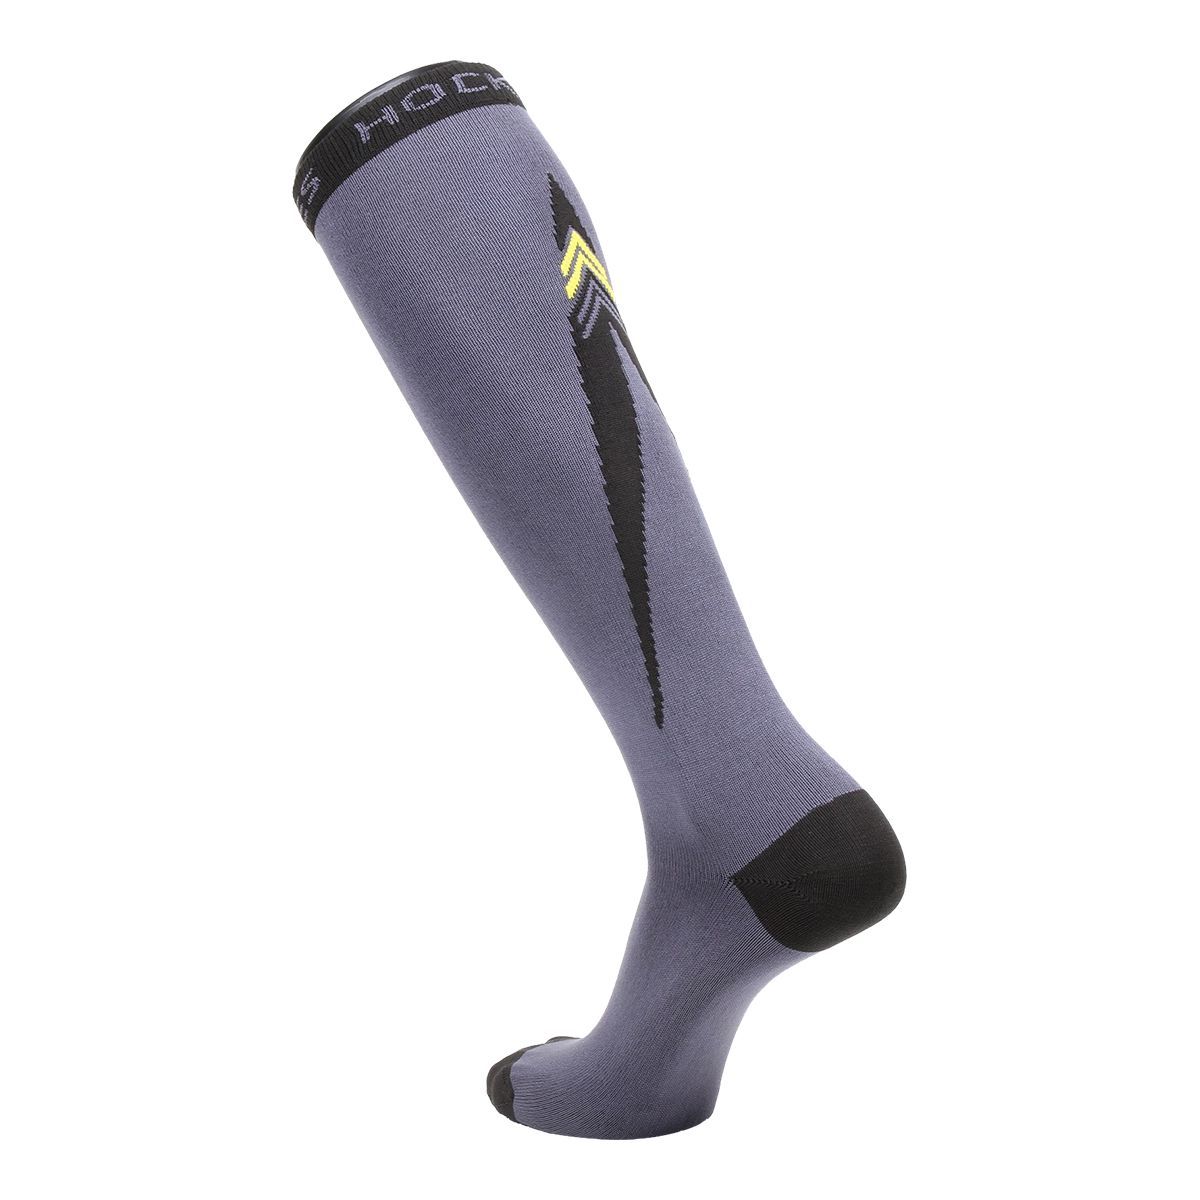 Howies Men's Thin Fit Hockey Socks, Stretchy, Moisture-Wicking